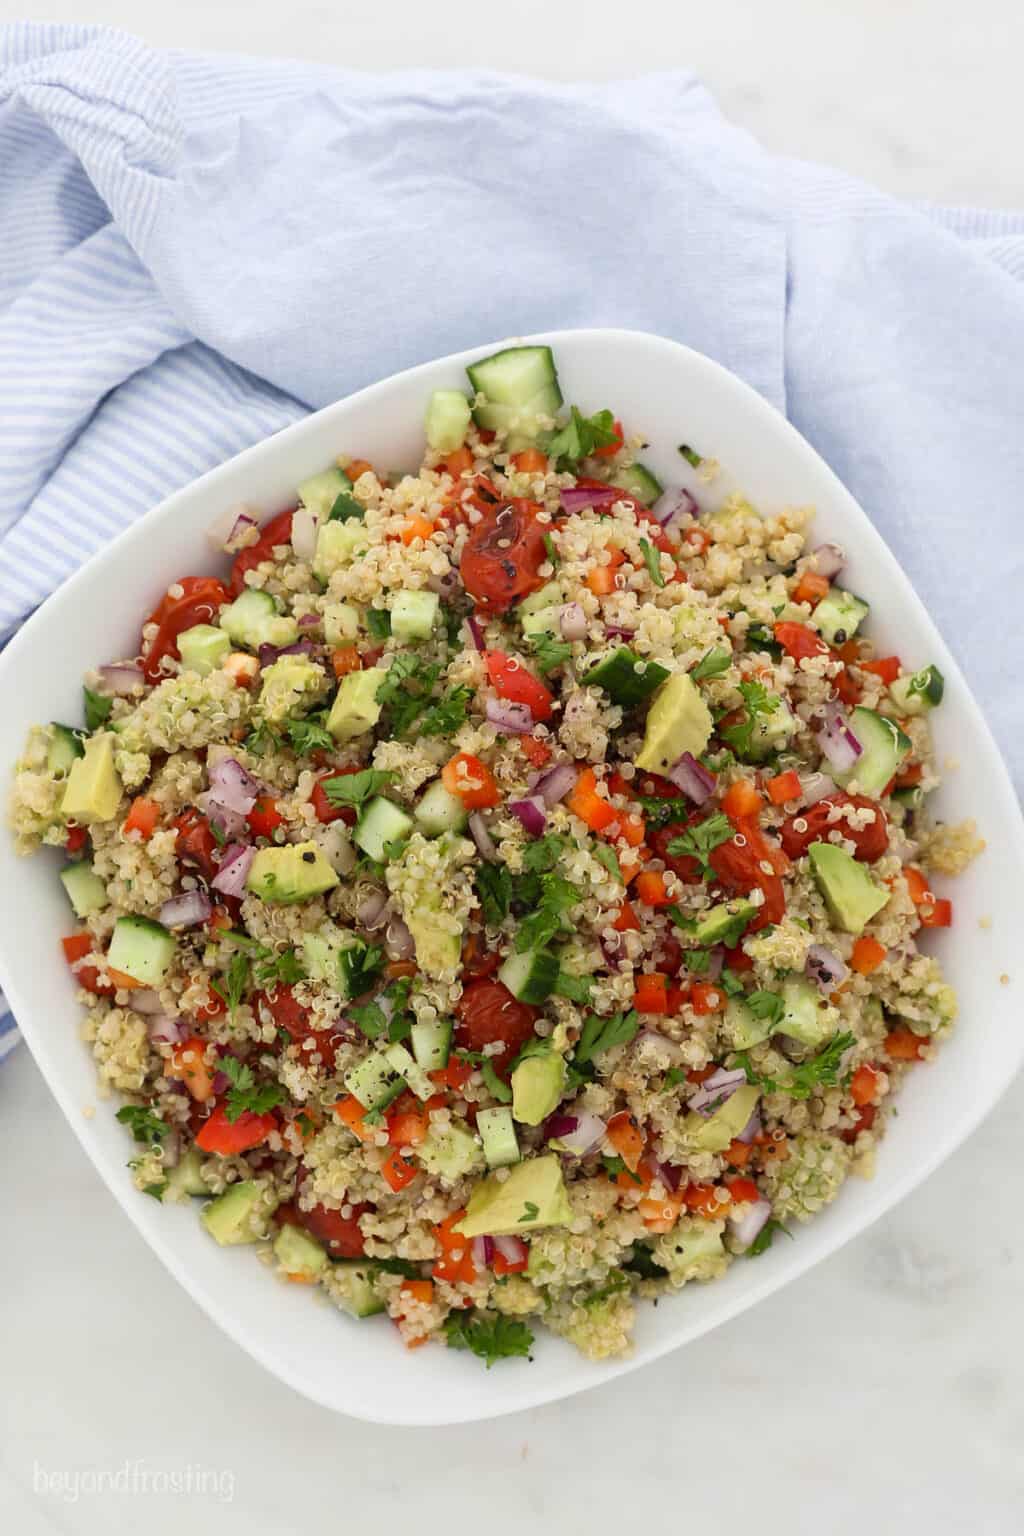 Easy Cold Quinoa Vegetable Salad | Beyond Frosting